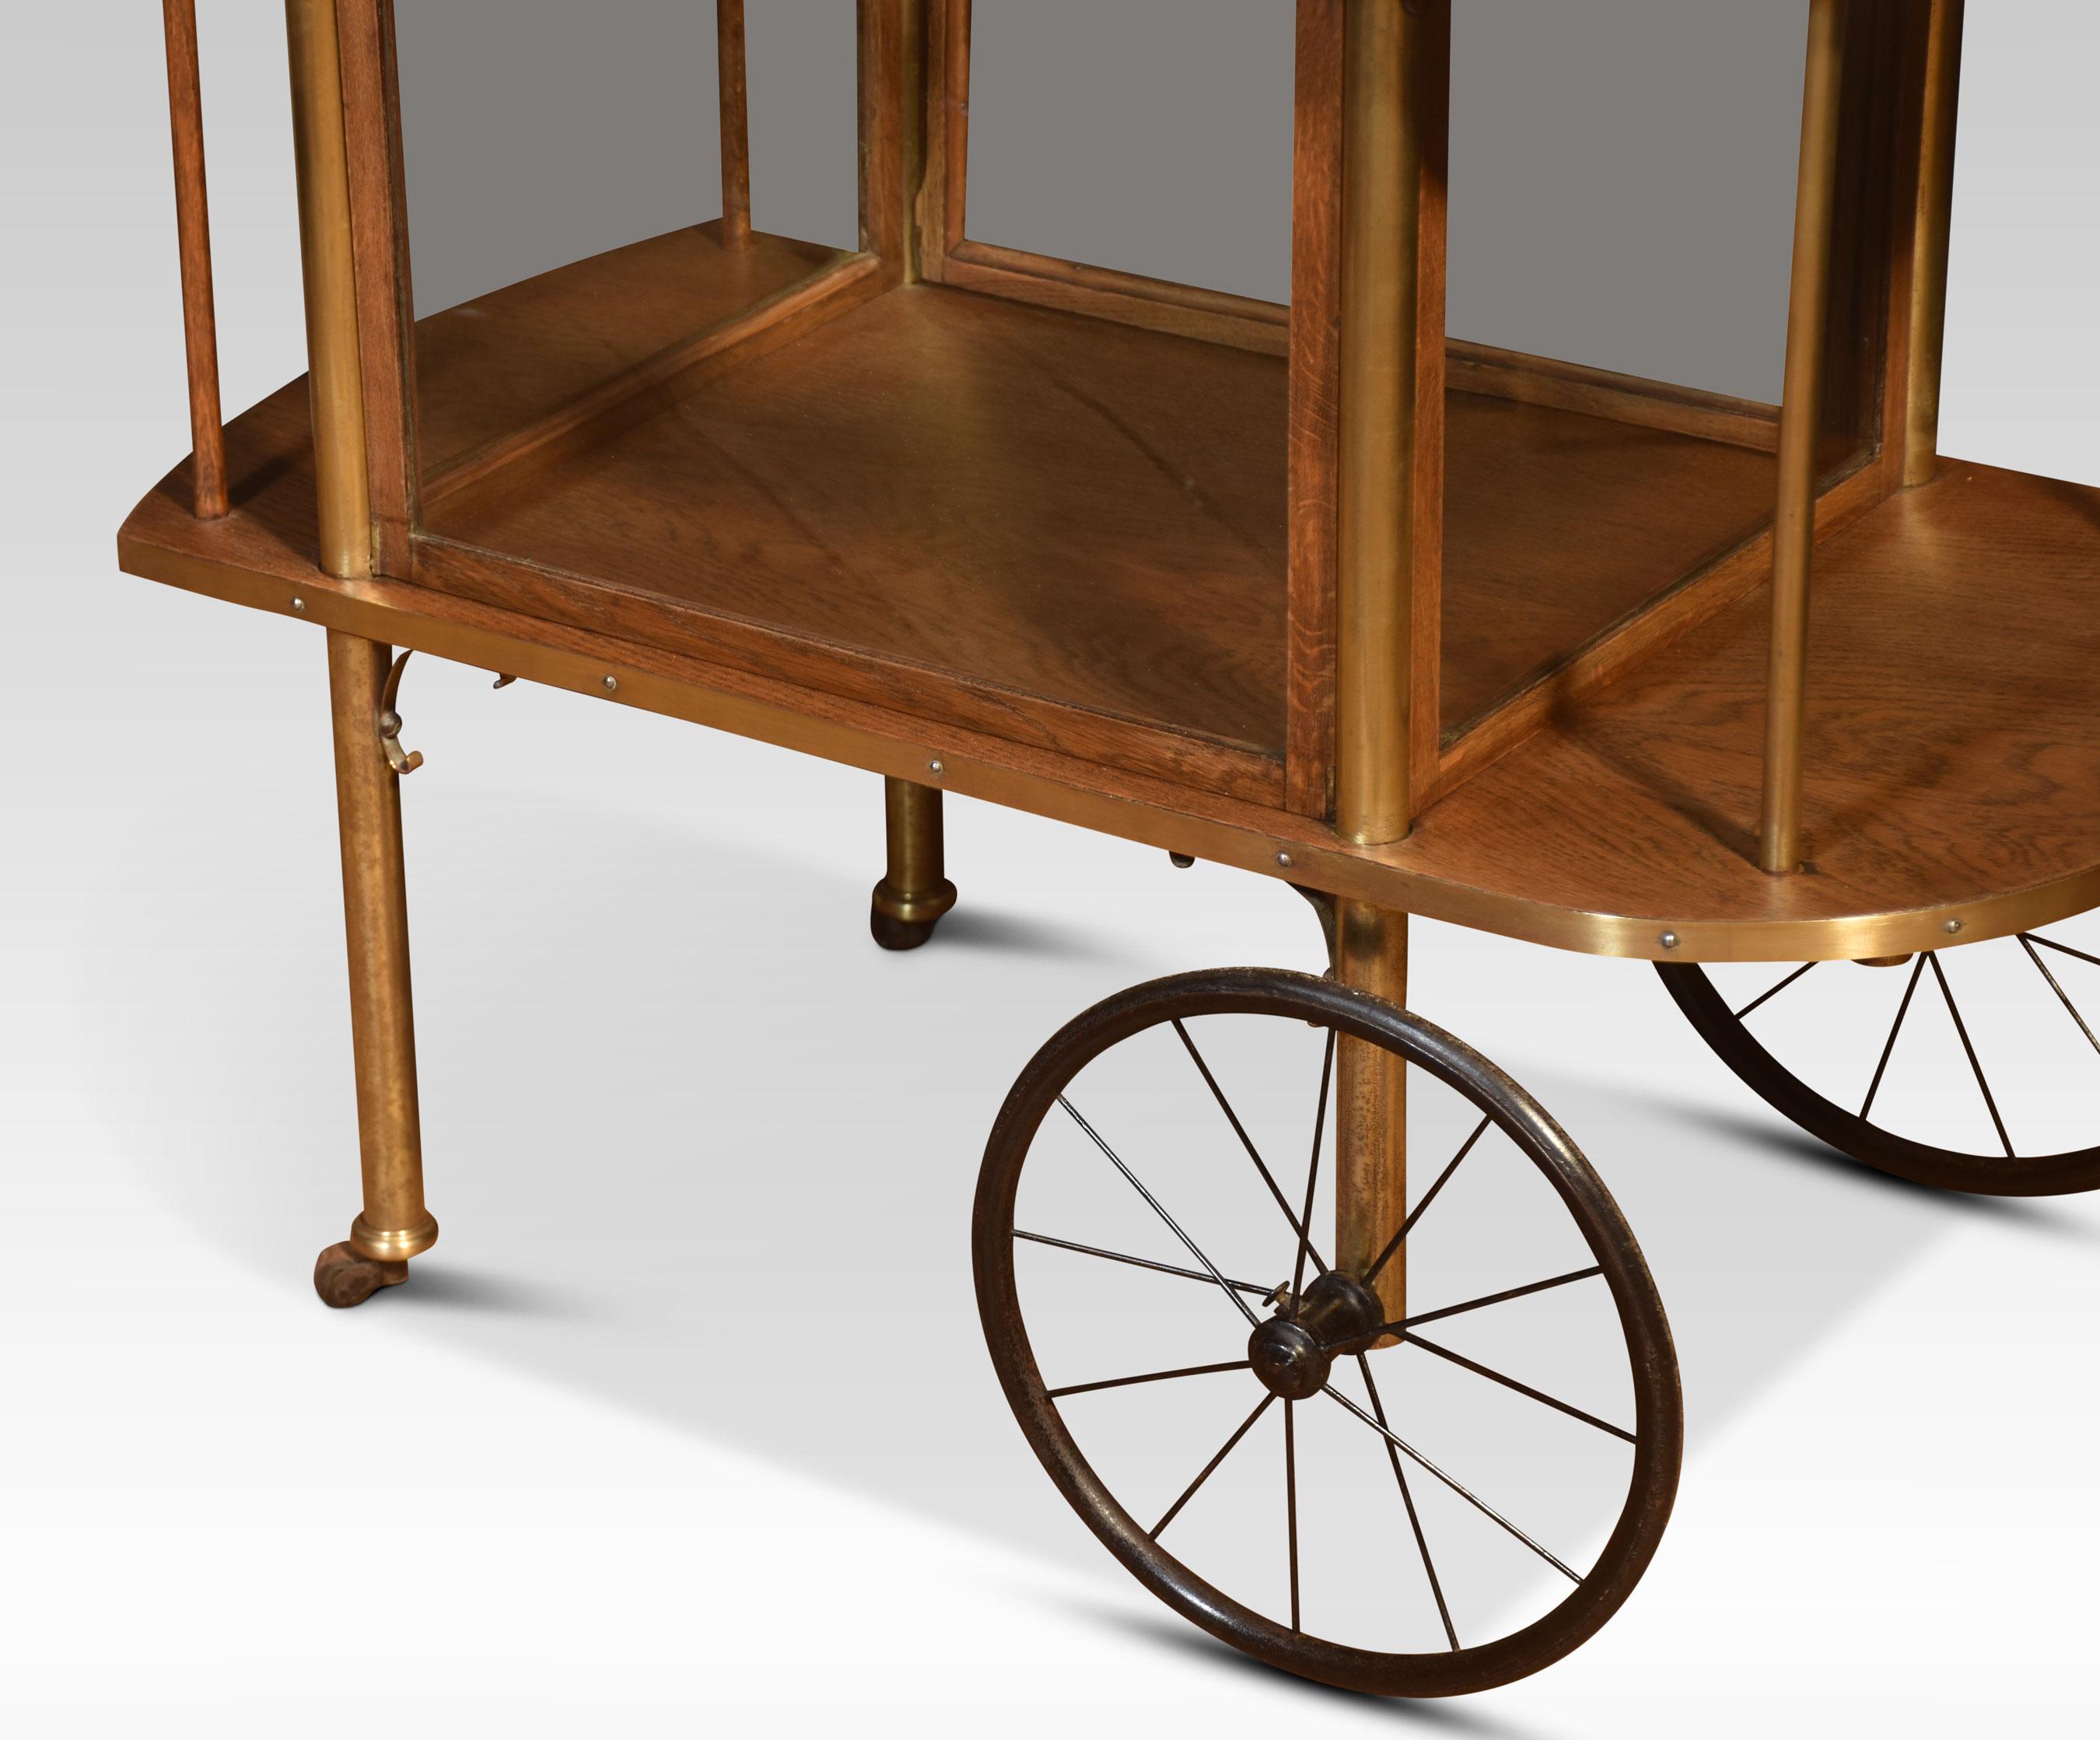 Oak drinks trolly having raised pierced brass gallery to the oak top with inset glass panel. Above large drinks cabinet with glass pannels having drop-down doors. All raised up on circular brass supports terminating in large spoked